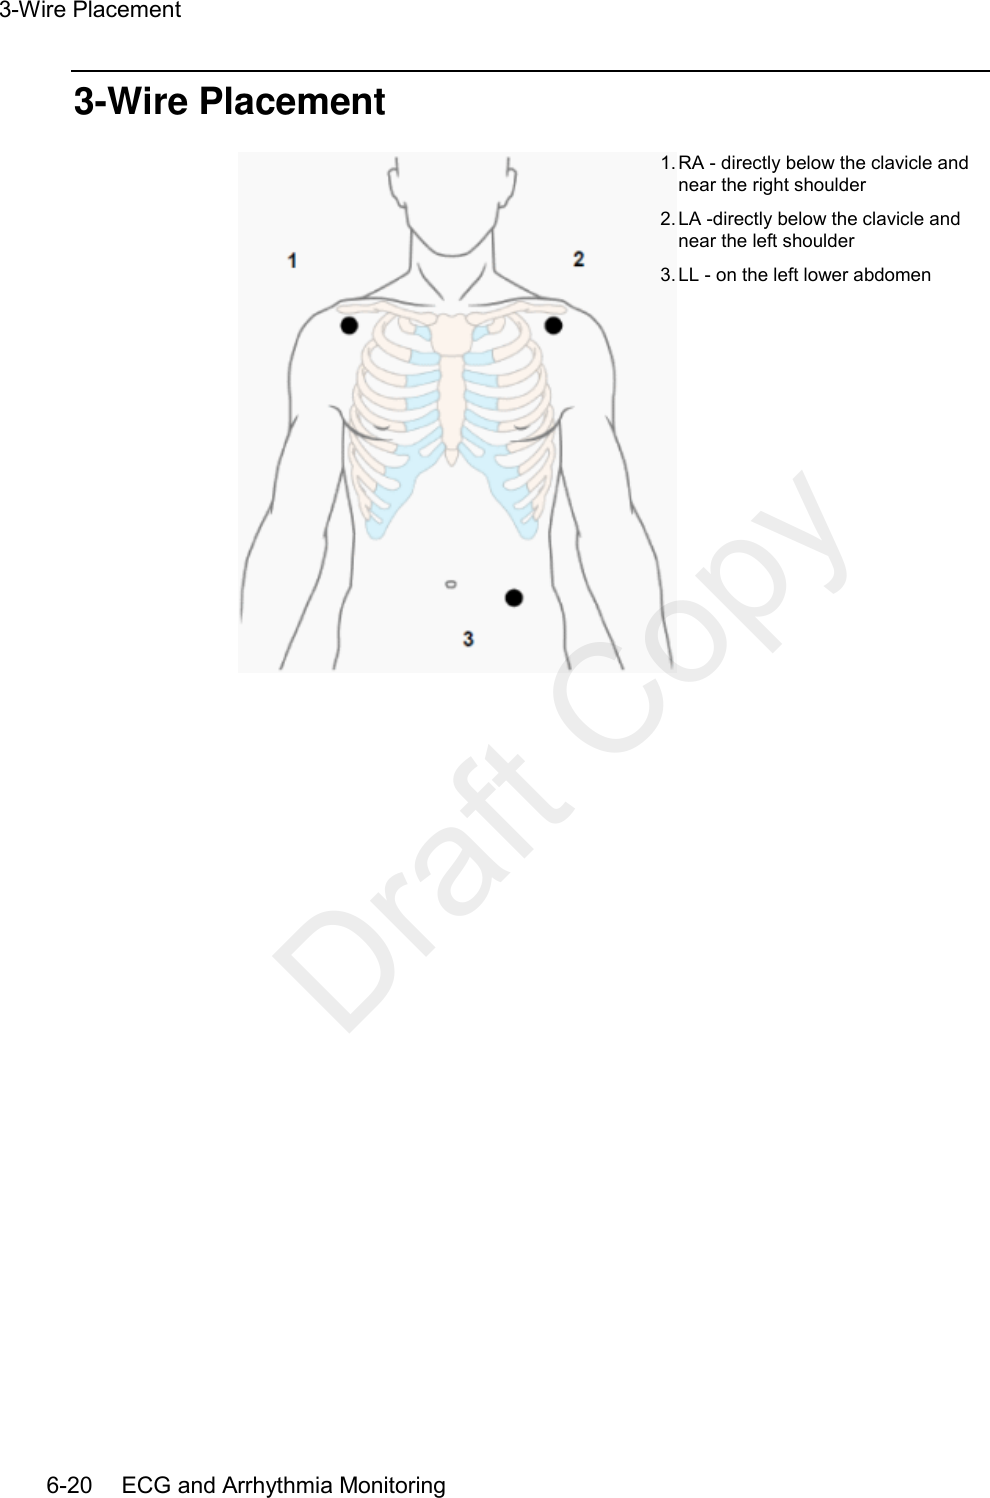 3-Wire Placement   6-20    ECG and Arrhythmia Monitoring 3-Wire Placement  1. RA - directly below the clavicle and near the right shoulder 2. LA -directly below the clavicle and near the left shoulder 3. LL - on the left lower abdomen   Draft Copy